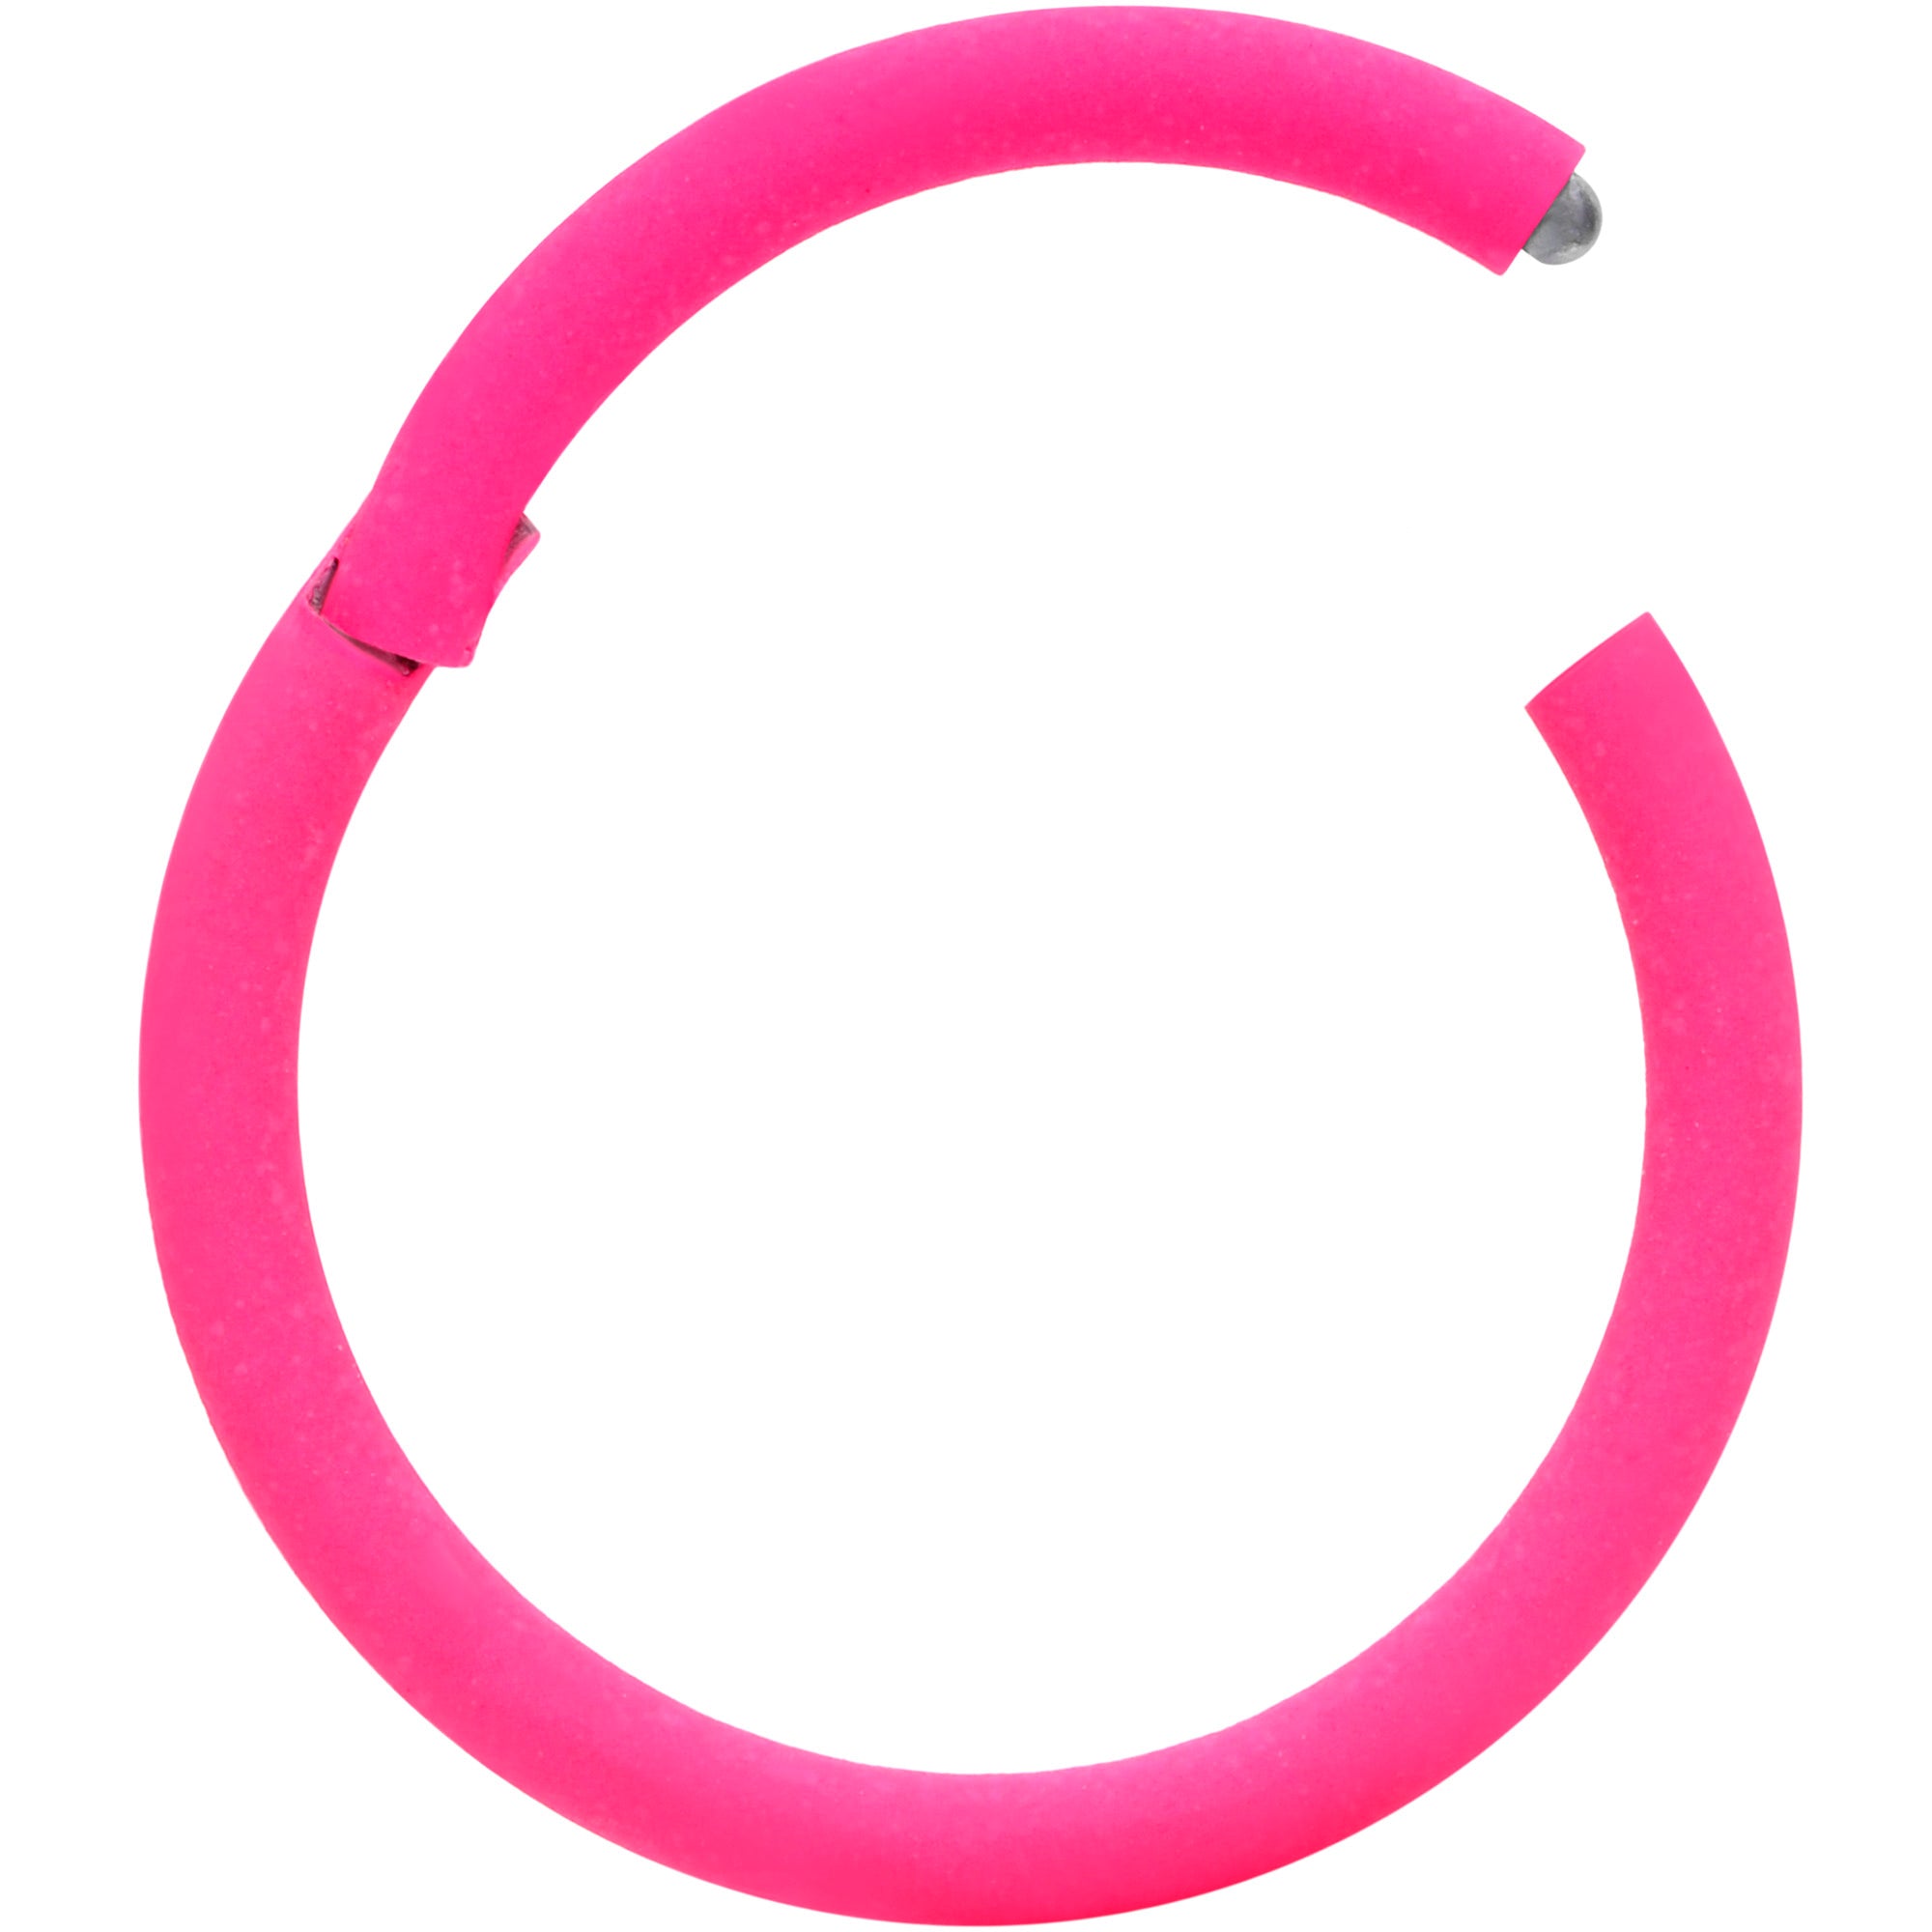 Buy Enorme Mini Hula Hoop Ring of 8 Pieces For Kids, Great for